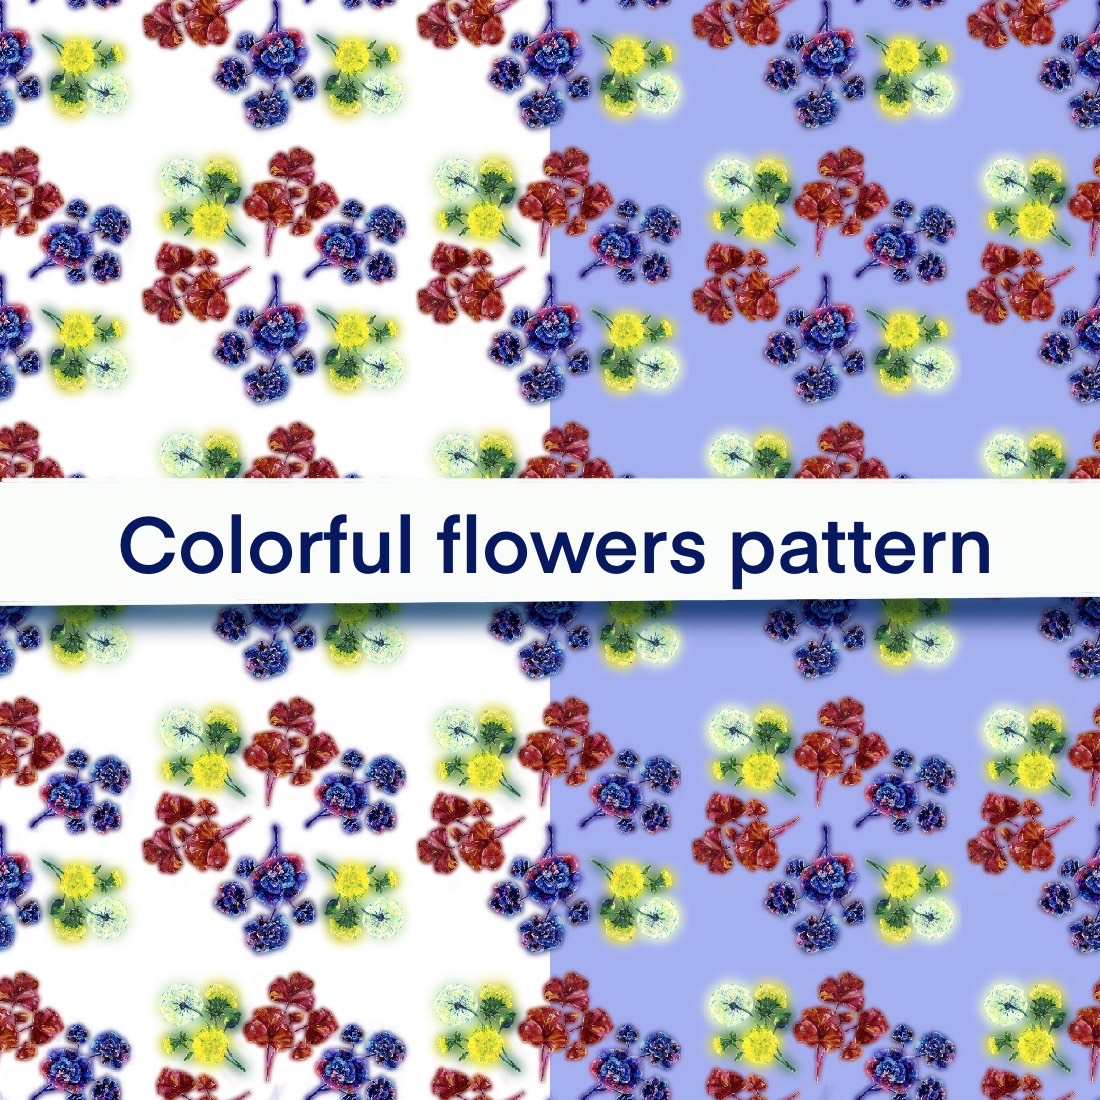 4 colorful flowers pattern preview image.